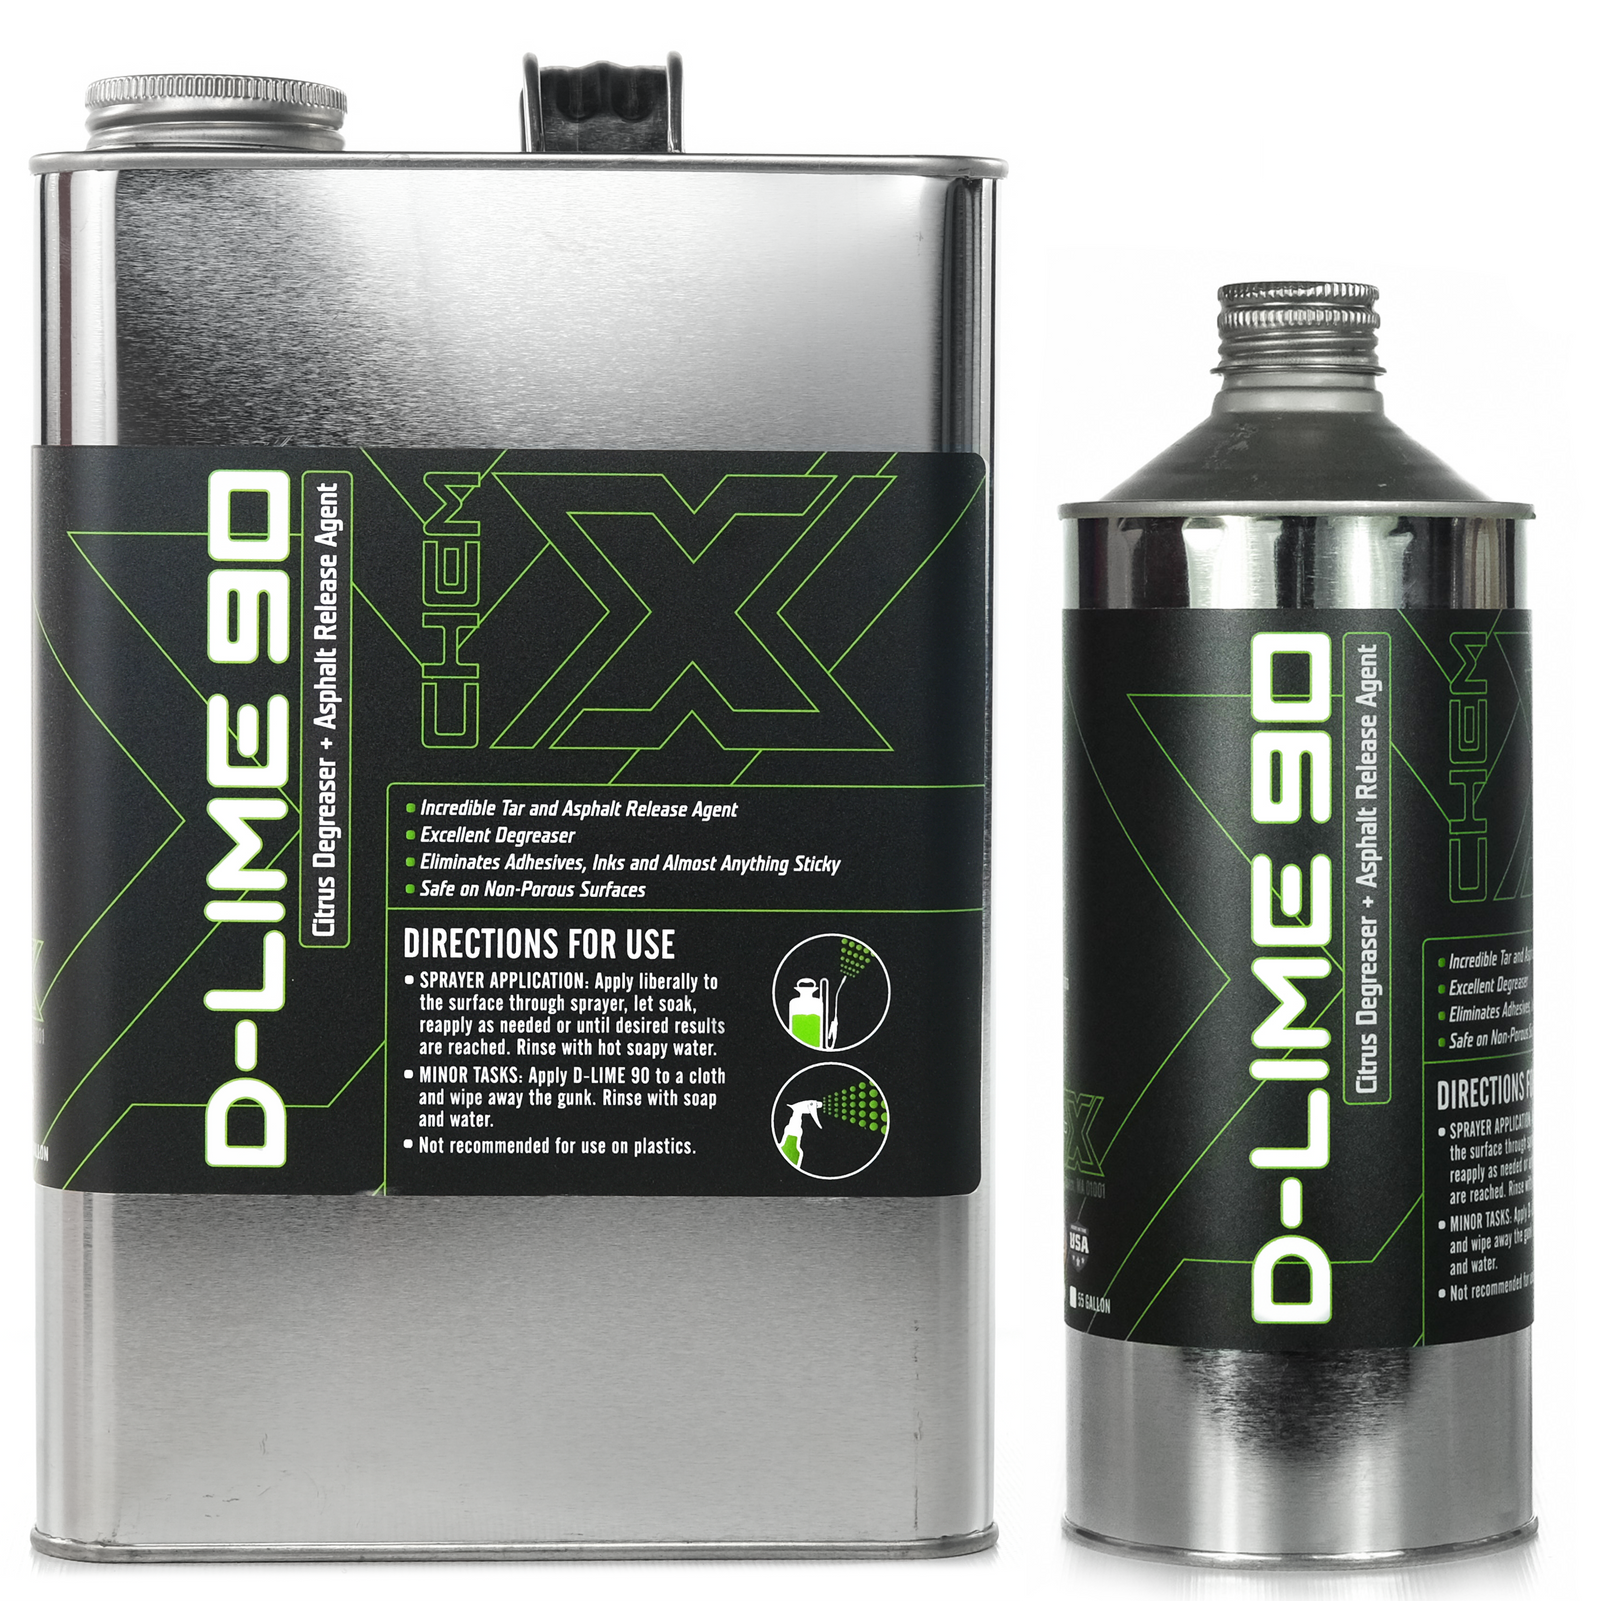 Heavy Duty: Super Concentrated Truck Wash + Degreaser + APC - Chem-X